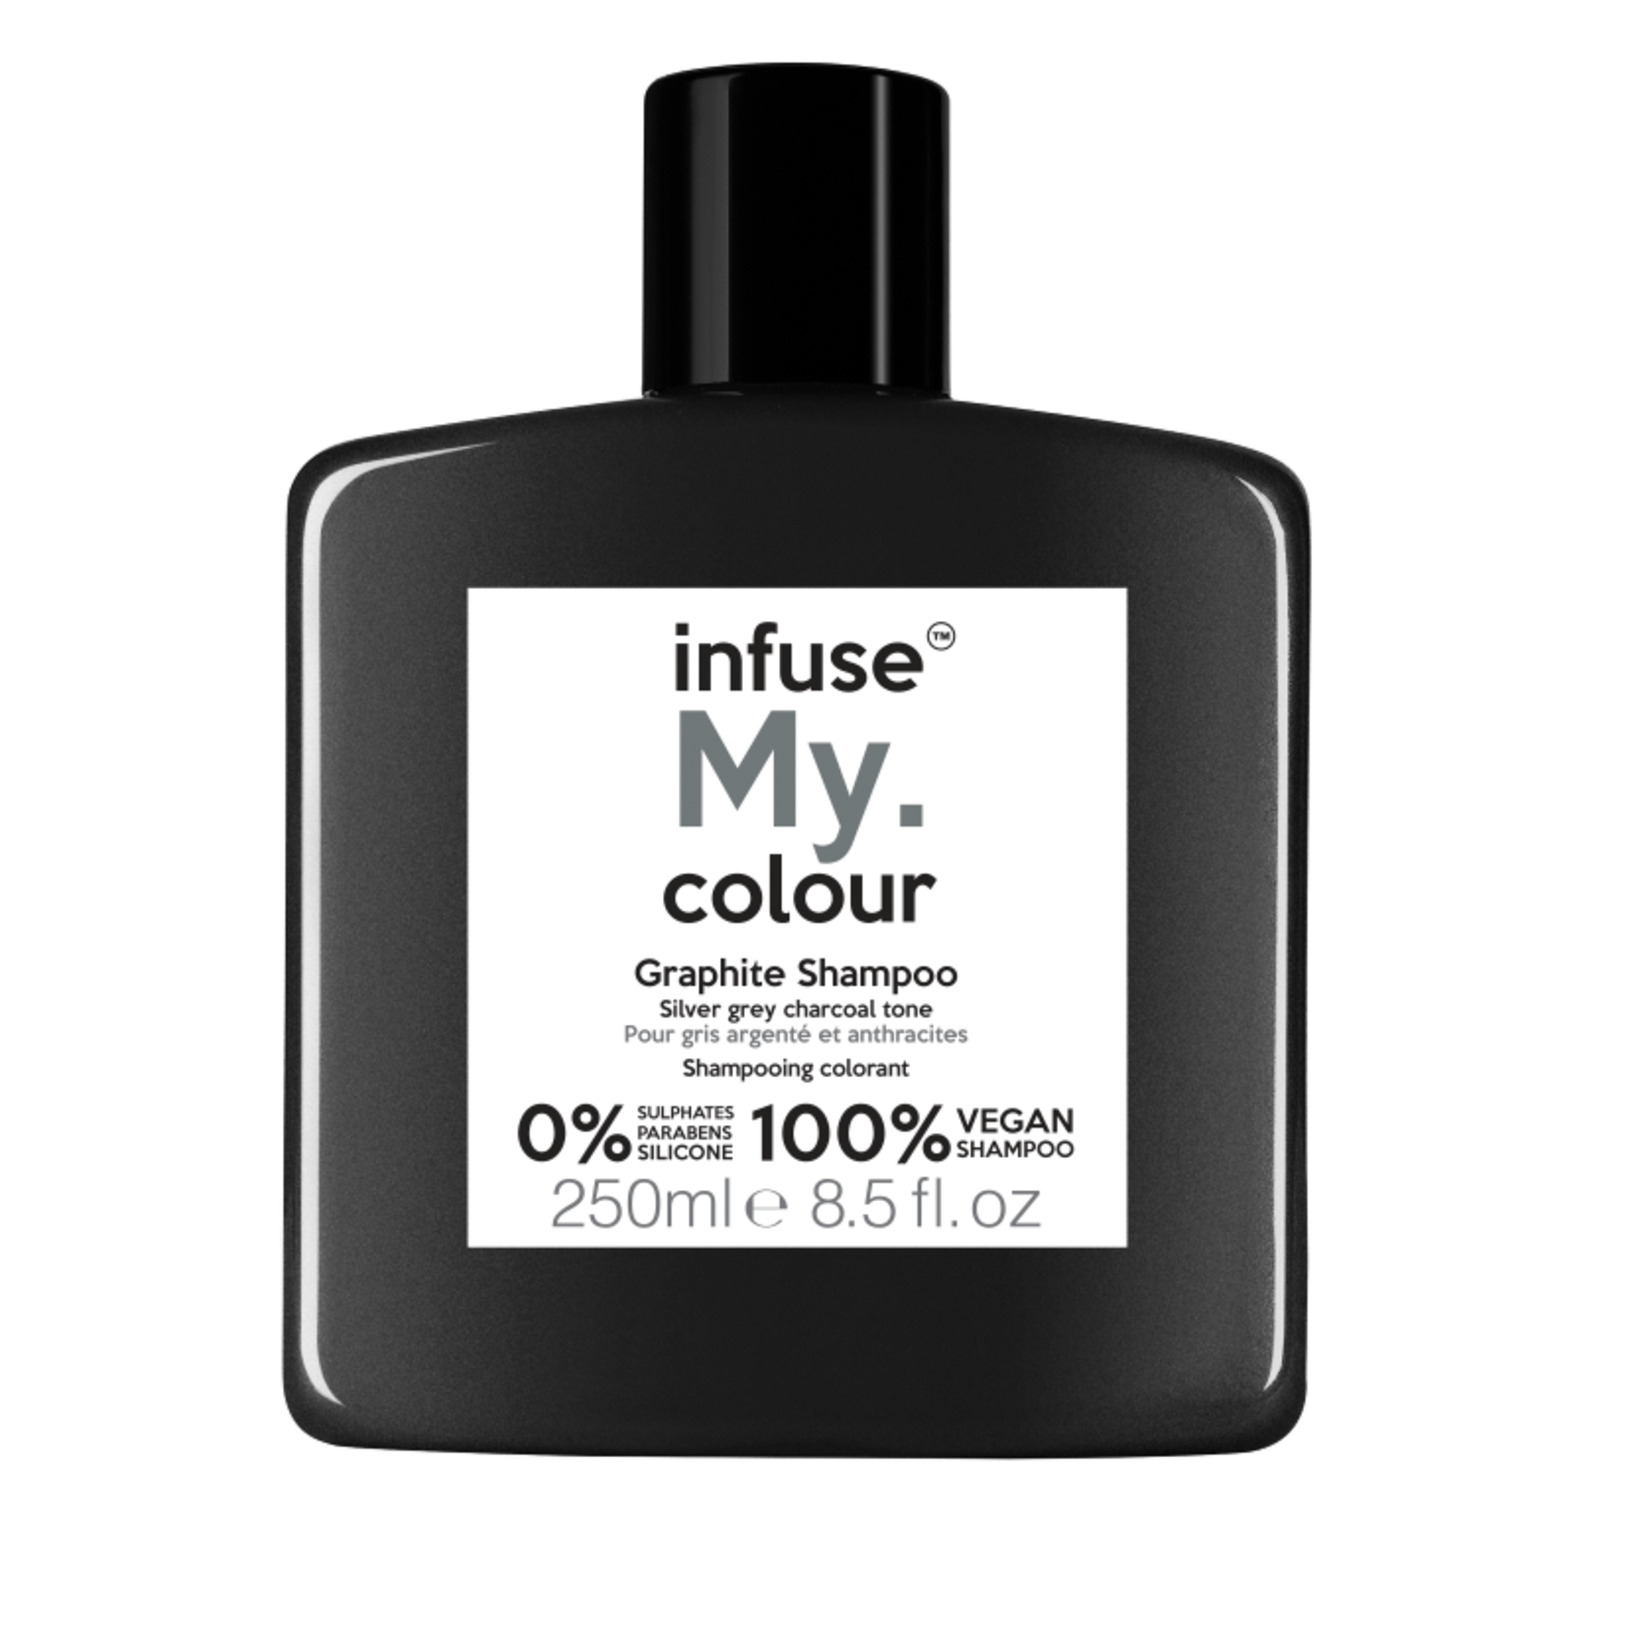 My.Haircare infuse My. Colour Graphite 250ml